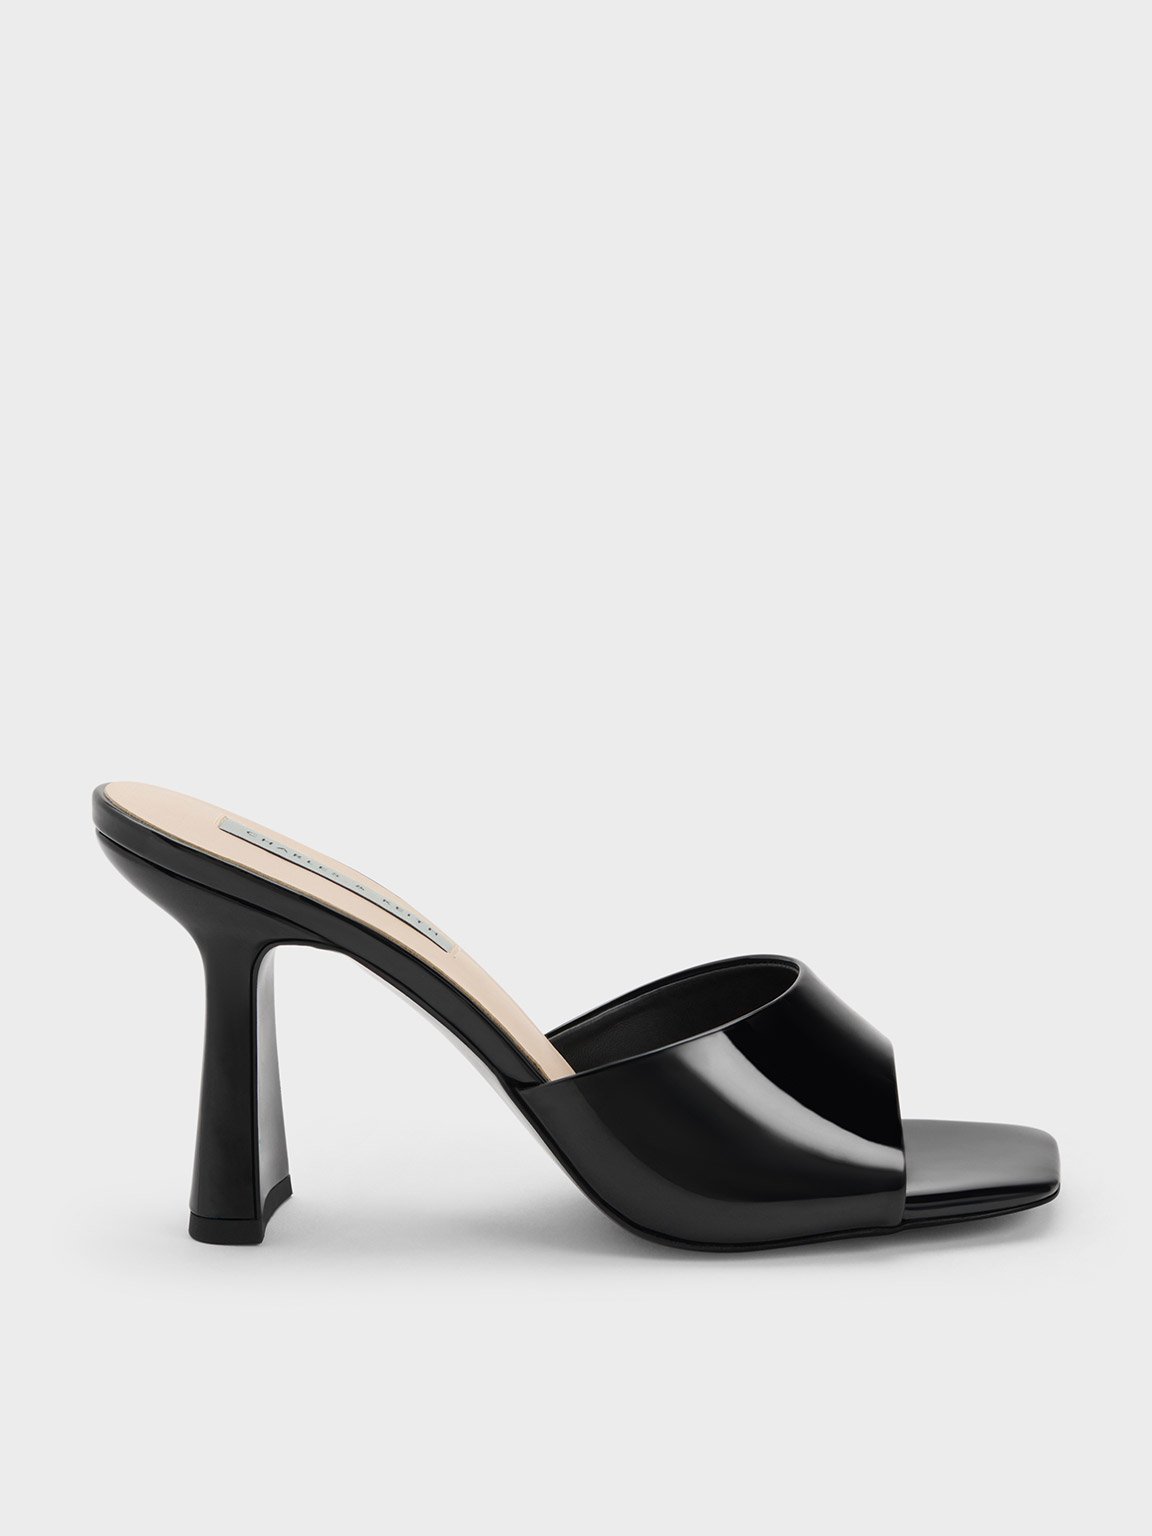 Charles & Keith Patent Square Toe Heeled Mules In Black Patent